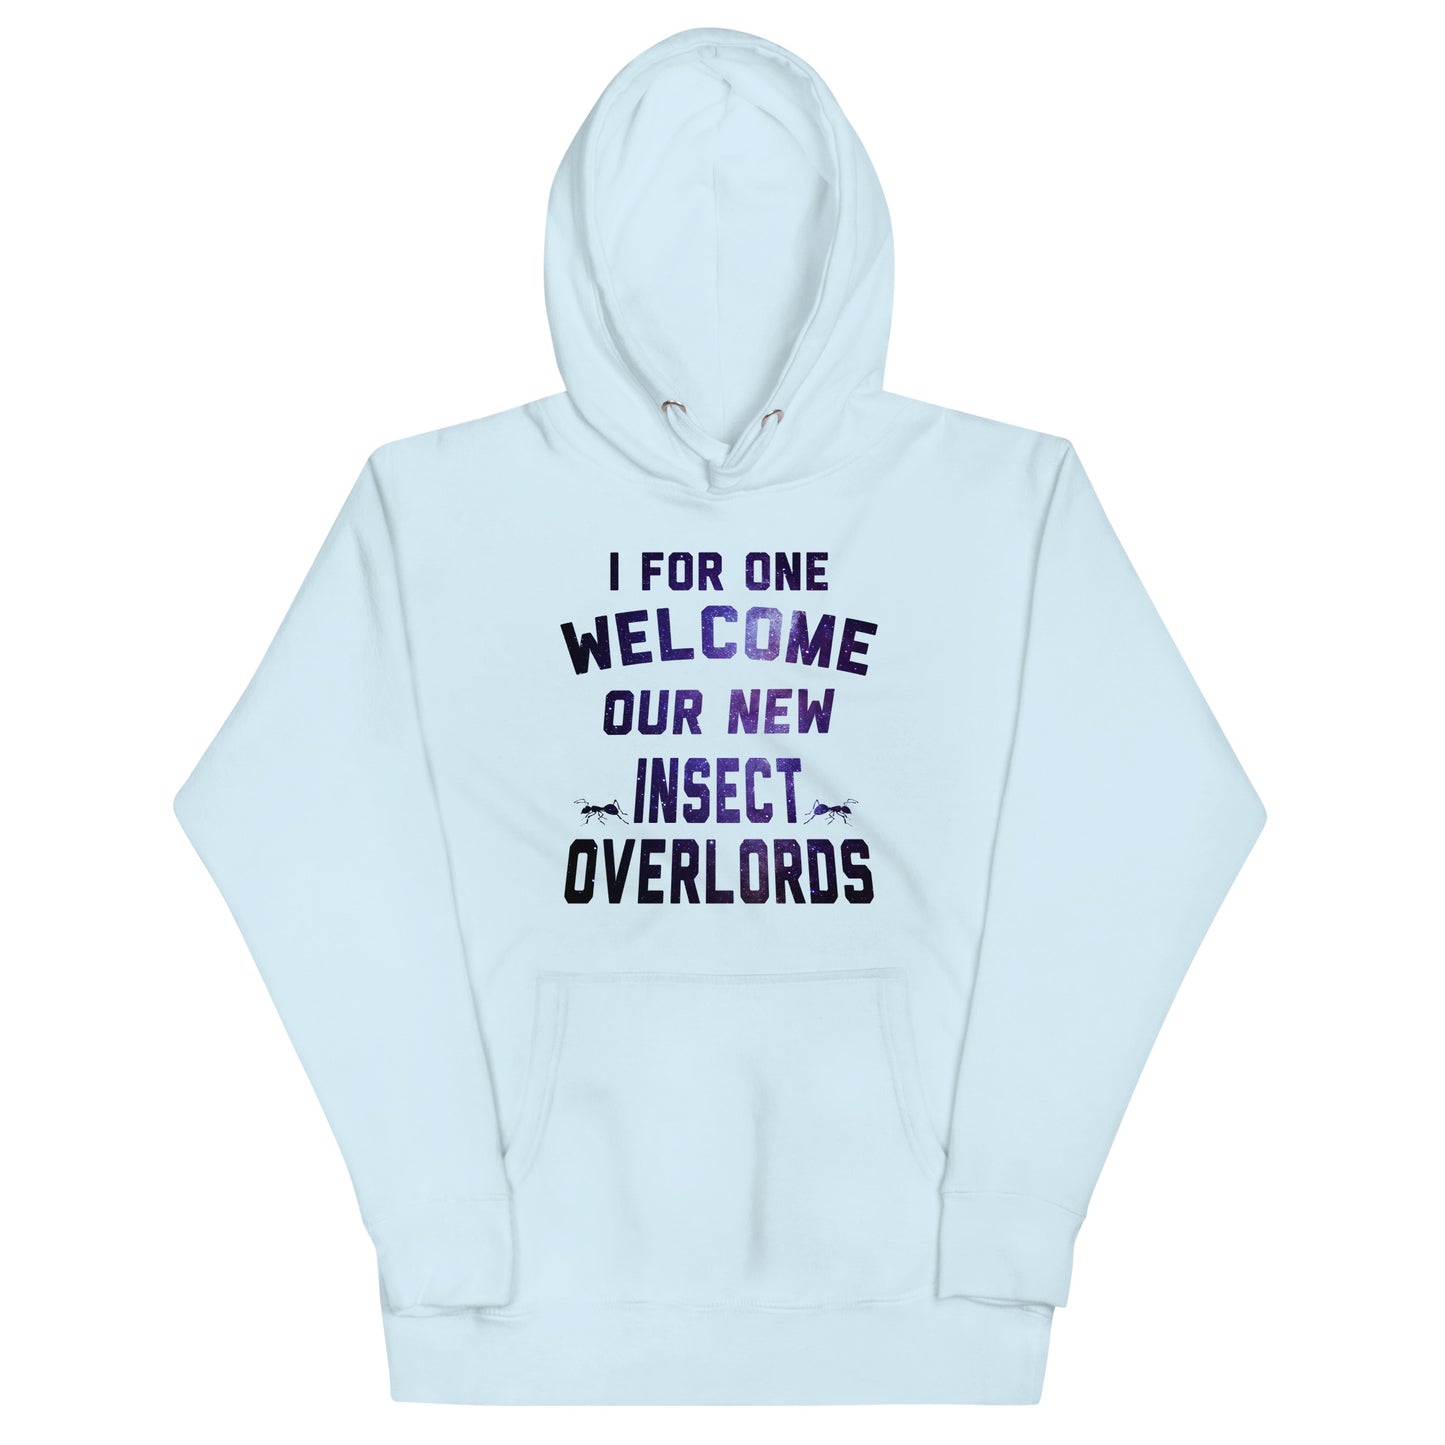 I For One Welcome Our New Insect Overlords Unisex Hoodie